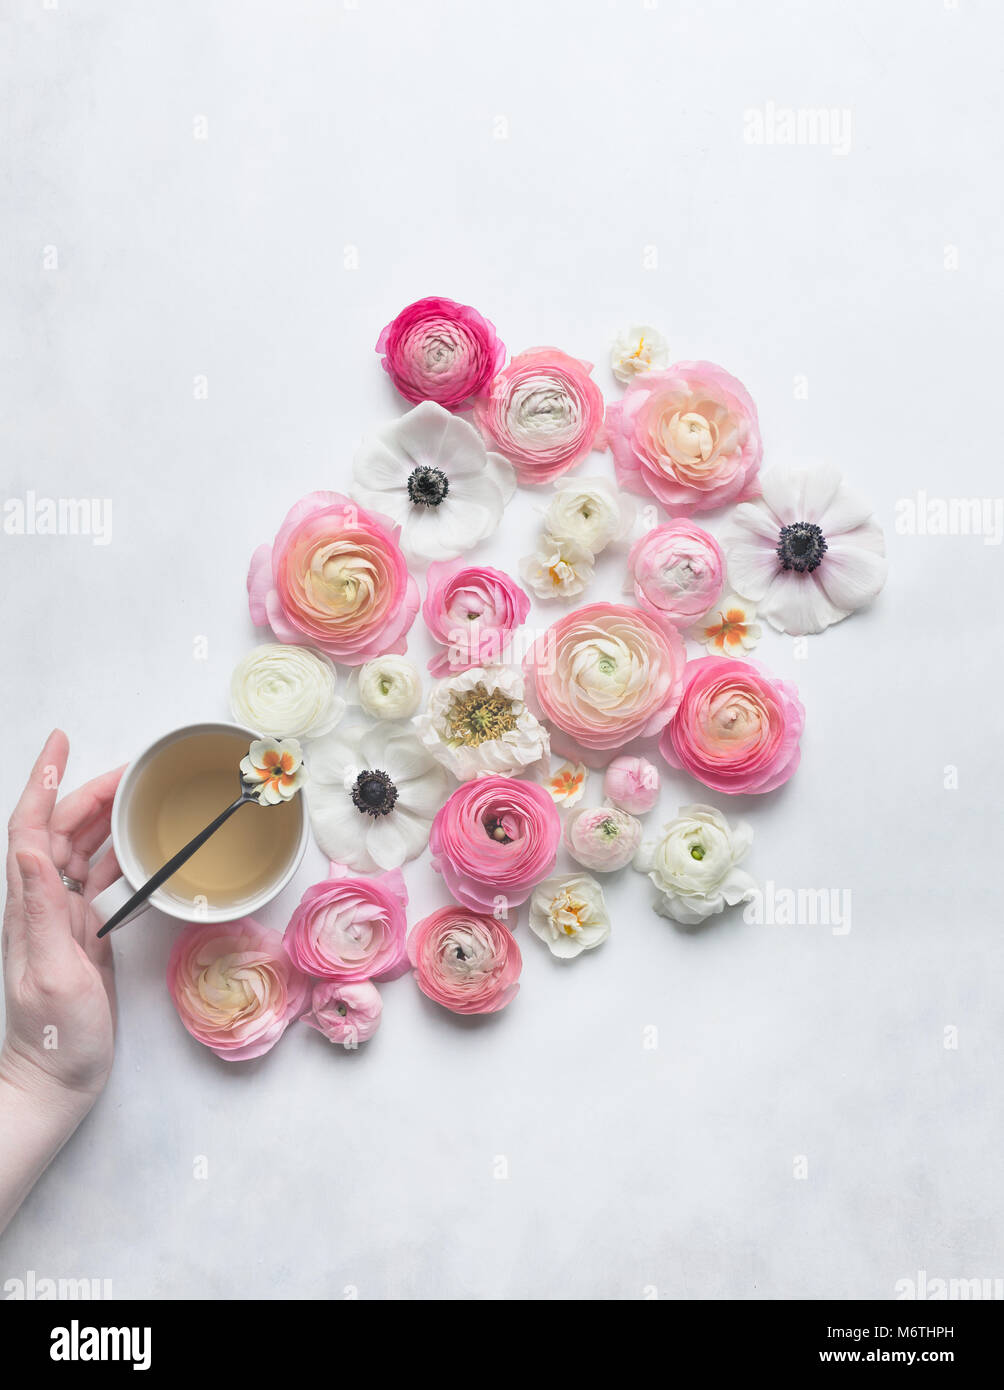 Spring flowers arranged on white & grey backdrop with hand touching teacup Stock Photo